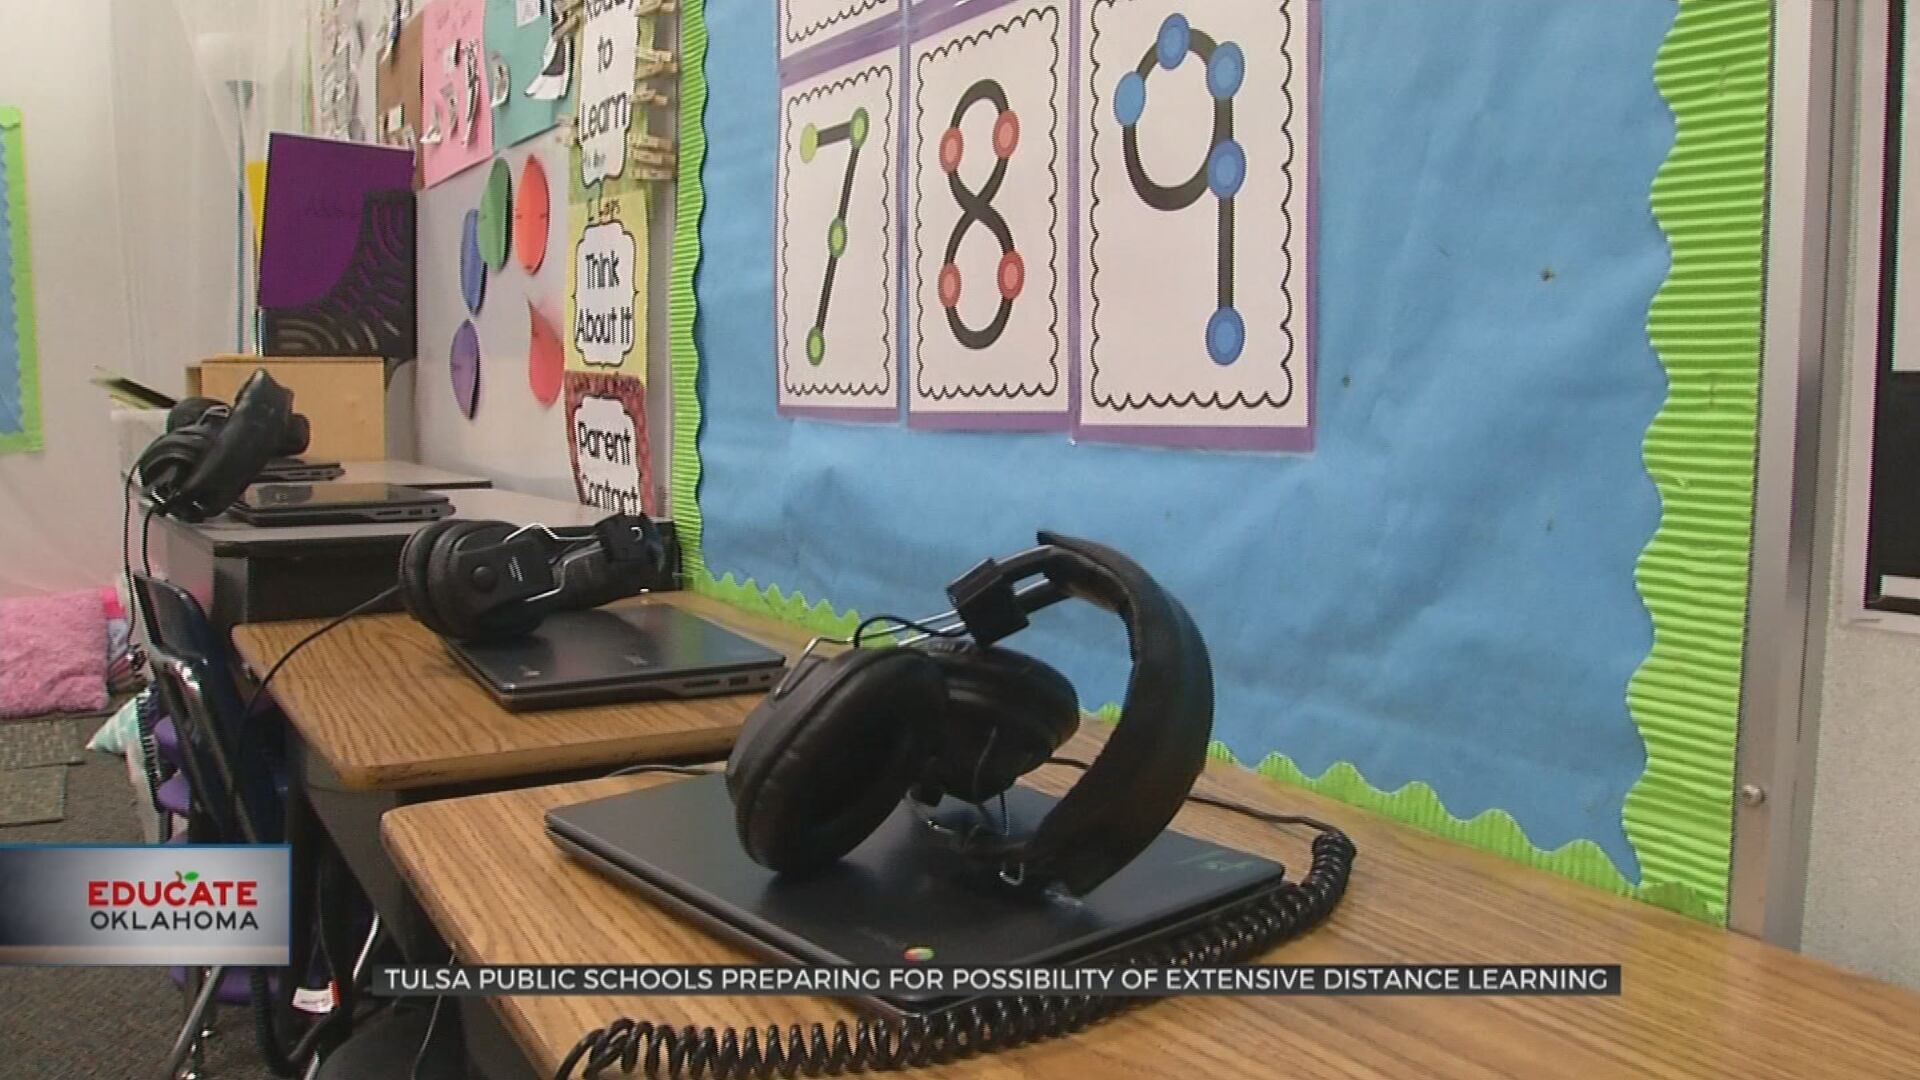 Tulsa Public Schools, Parents Prepare For Possibility Of Extensive Distance Learning 